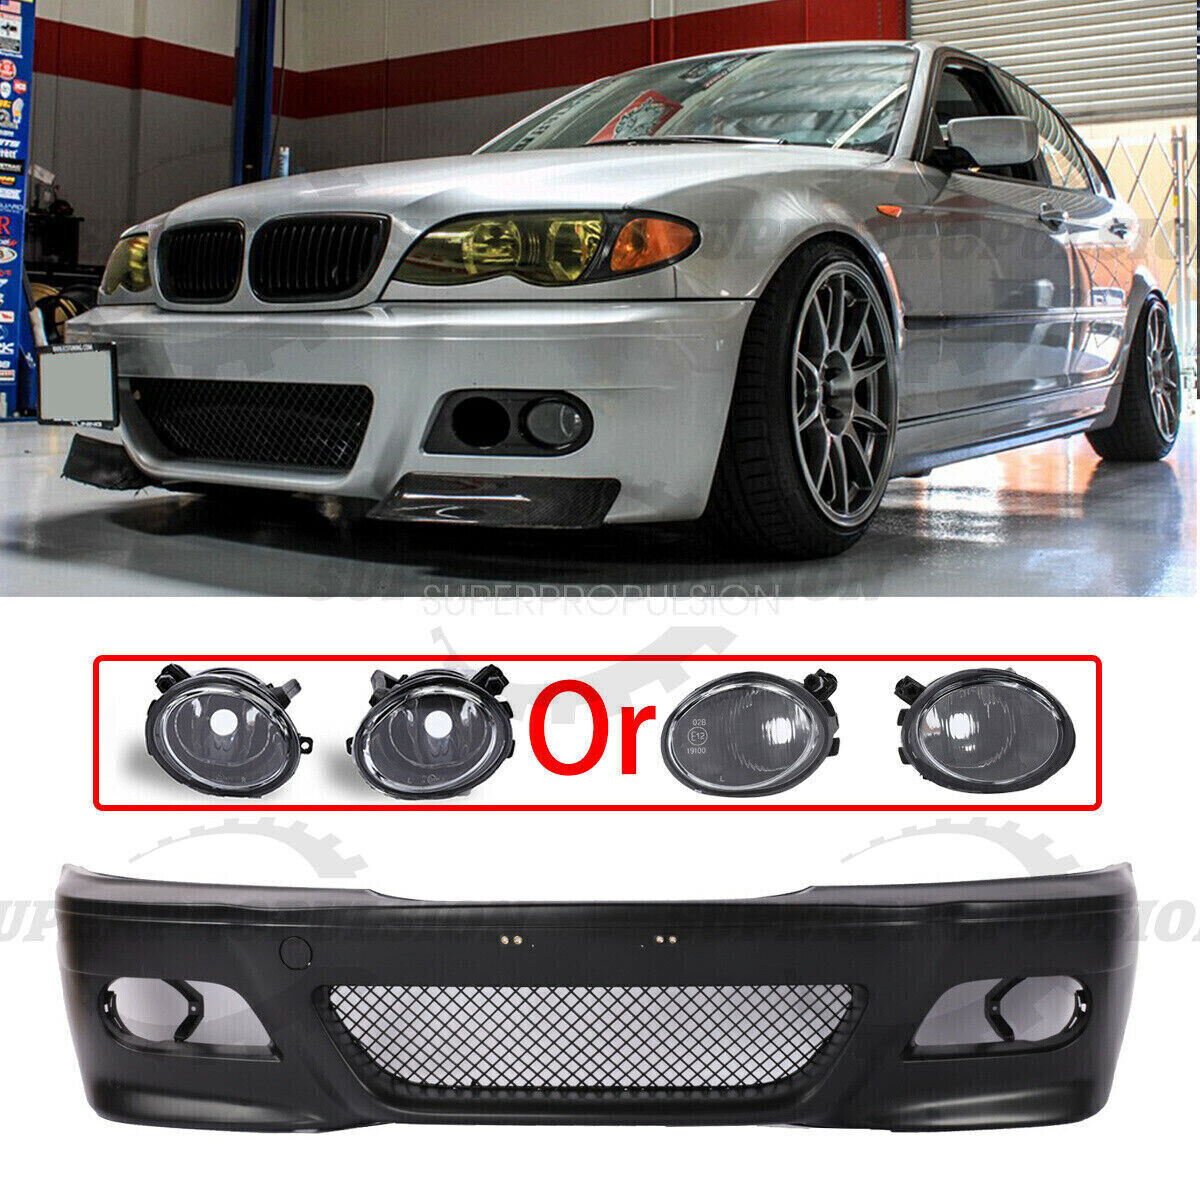 M3 Style Front Bumper +Fog lights+Dual Hole Covers Fit BMW E46 4dr 2dr 3-Series